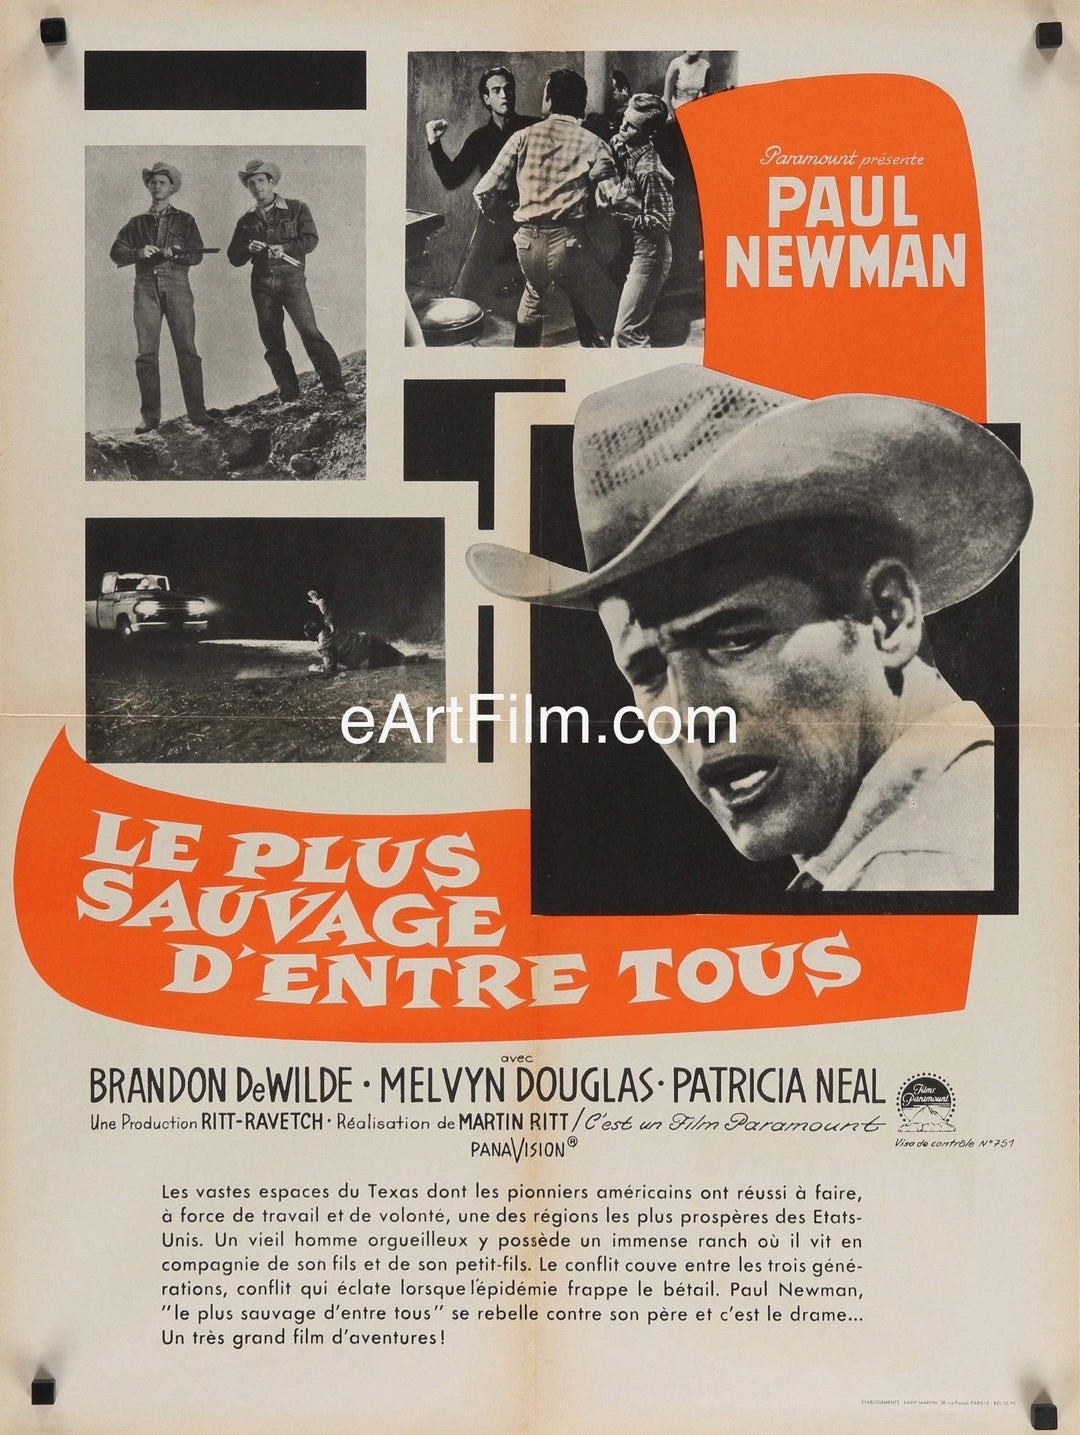 eArtFilm.com French Affiche Movie Poster (24"x32") Hud French Affiche 24x32 R60s Paul Newman as the man with the barbed wire soul